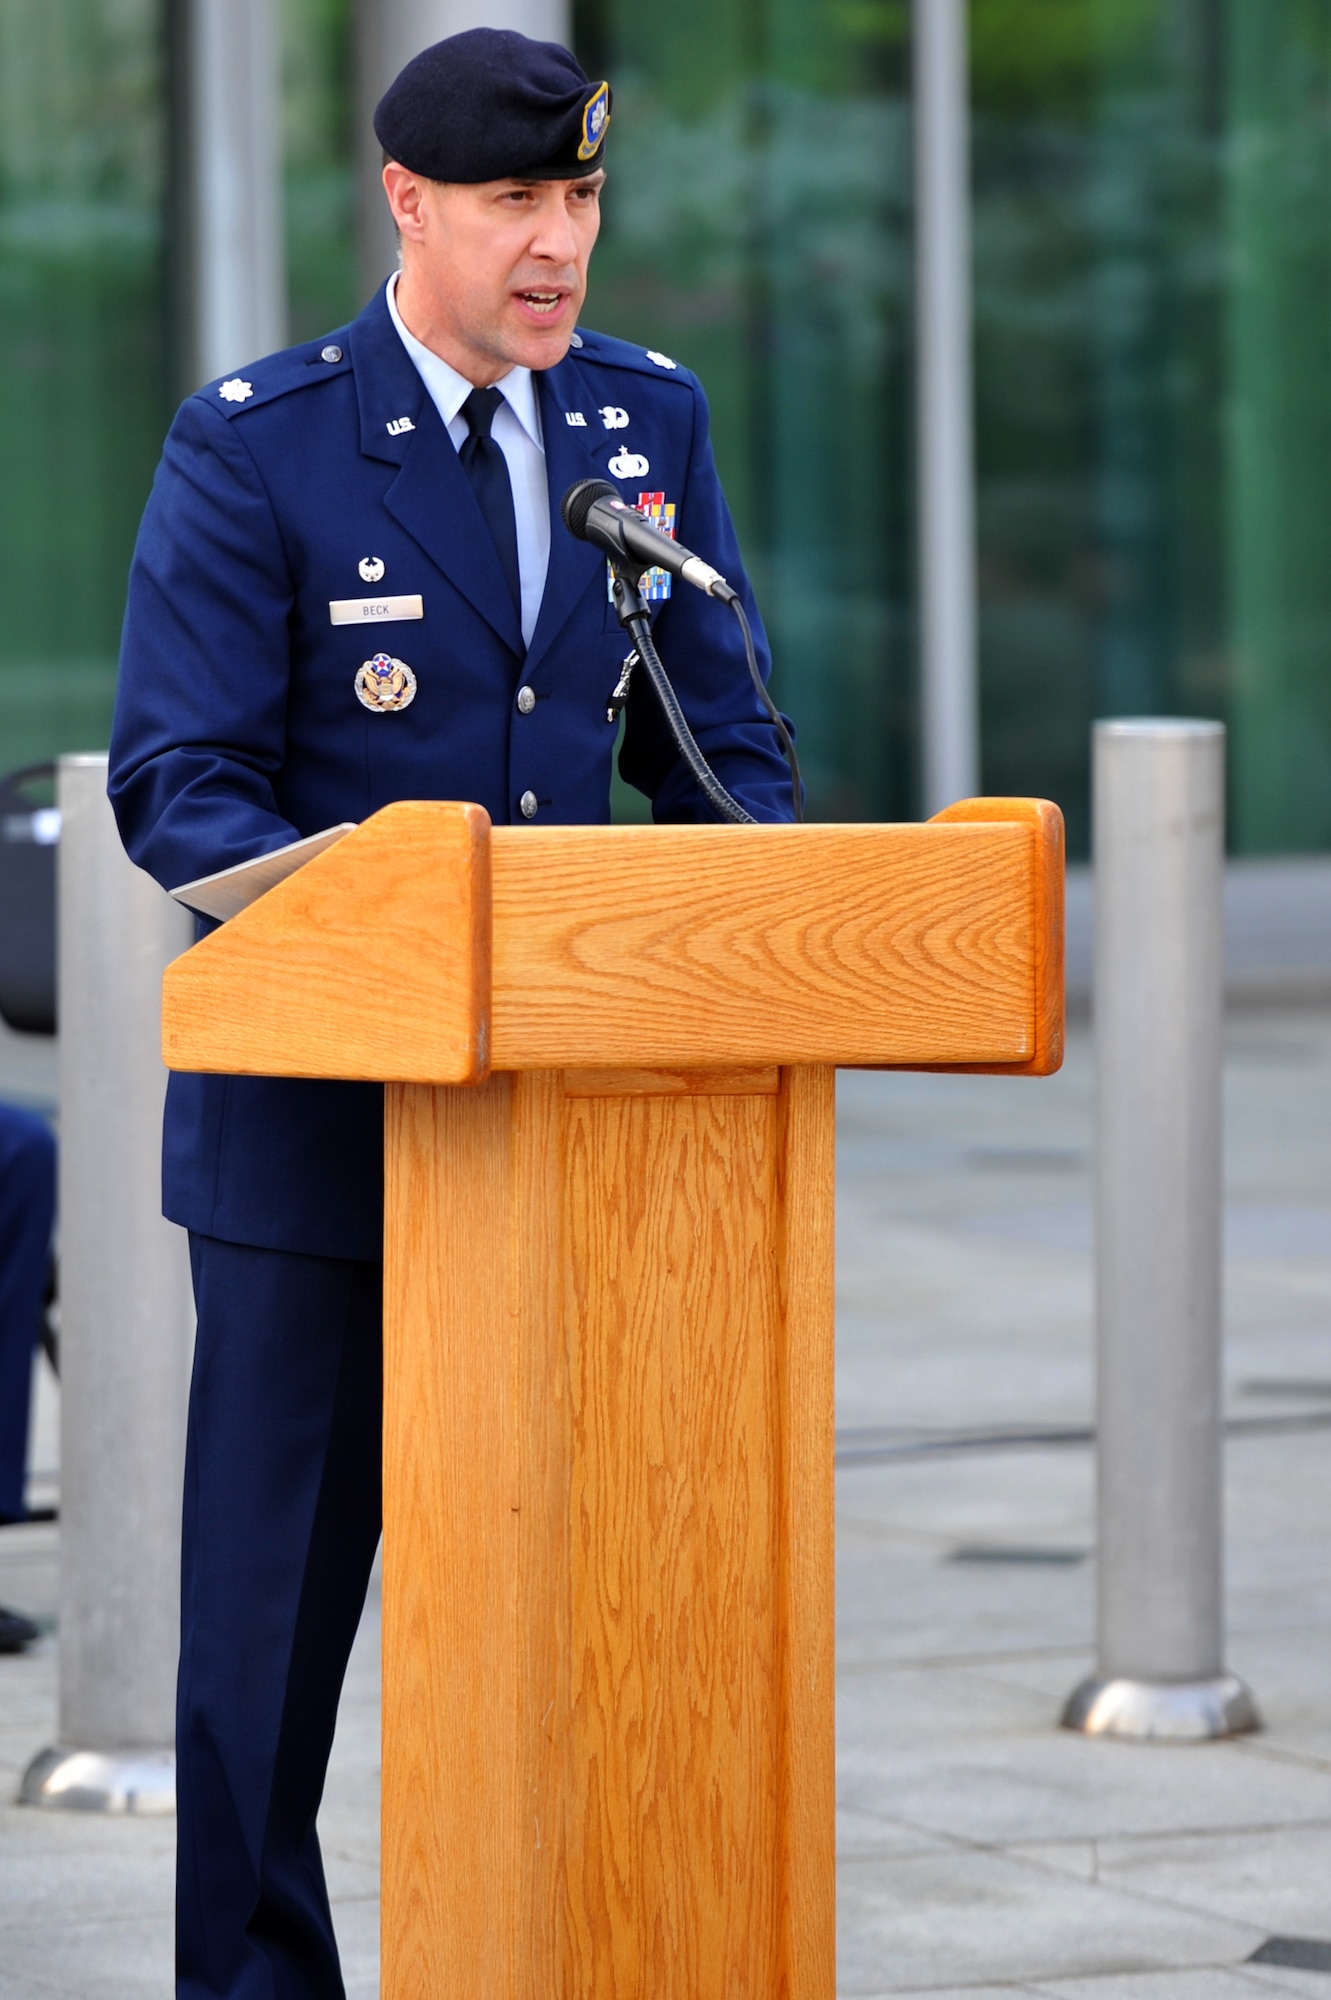 Lt. Col. Jason Beck, 51st Security Forces Squadron commander, speaks during a retreat ceremony at Osan Air Base, Republic of Korea, May 13, 2013. The ceremony was held to honor fallen defenders and Office of Special Investigations agents. (U.S. Air Force photo/Staff Sgt. Emerson Nuñez)